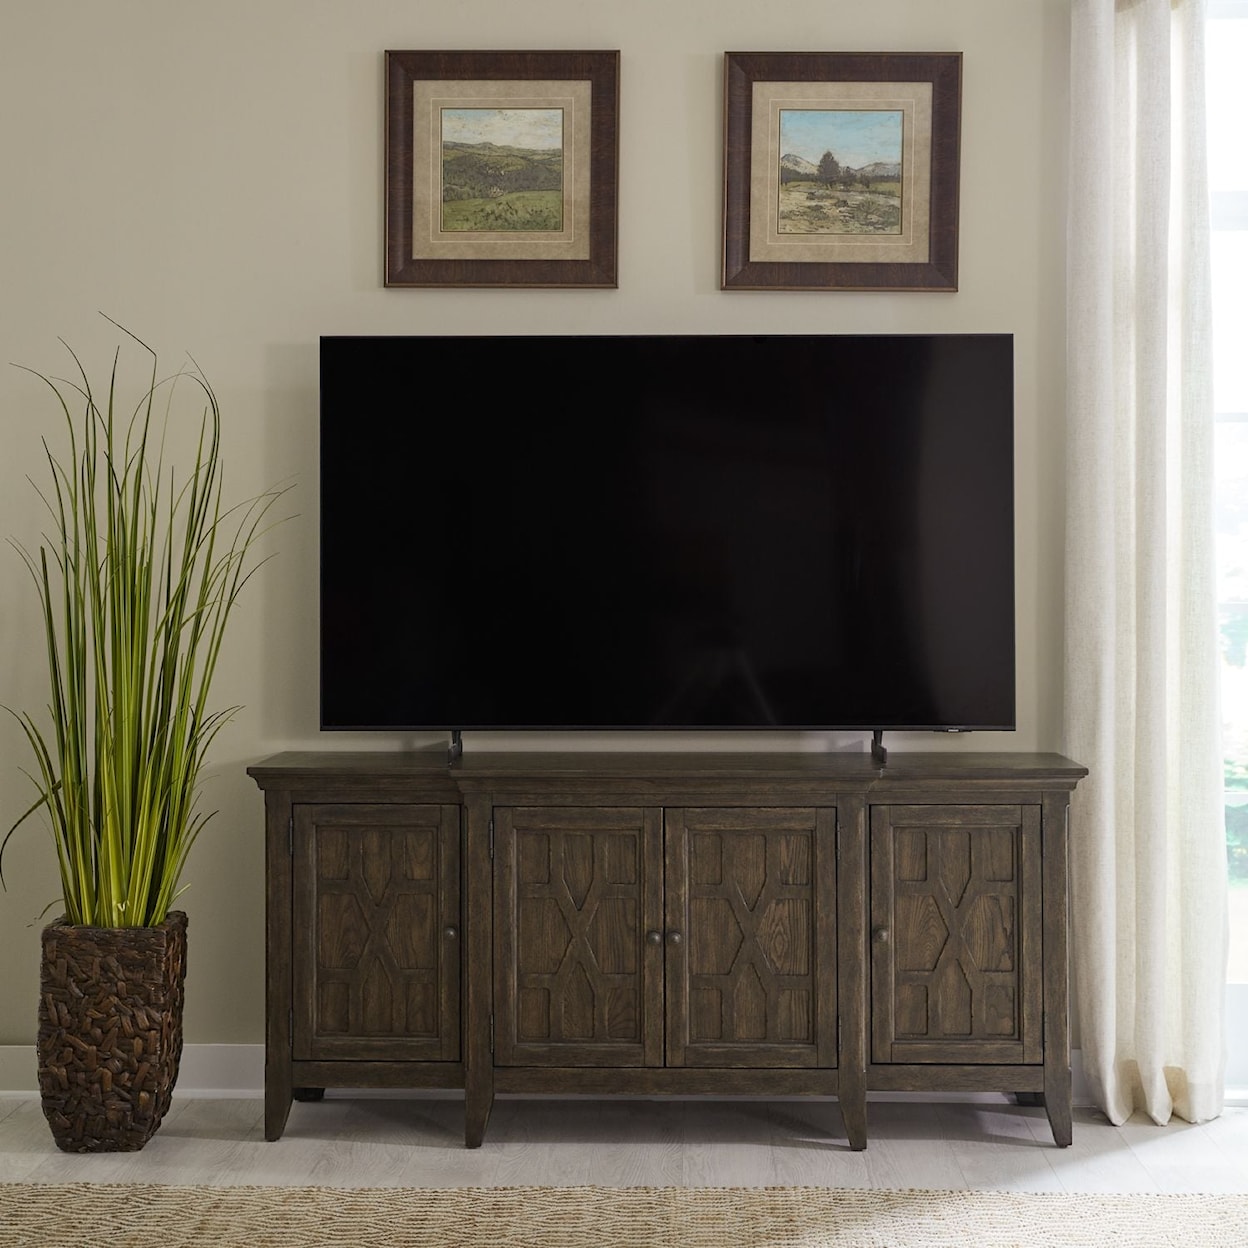 Libby Paradise Valley 76" TV Console